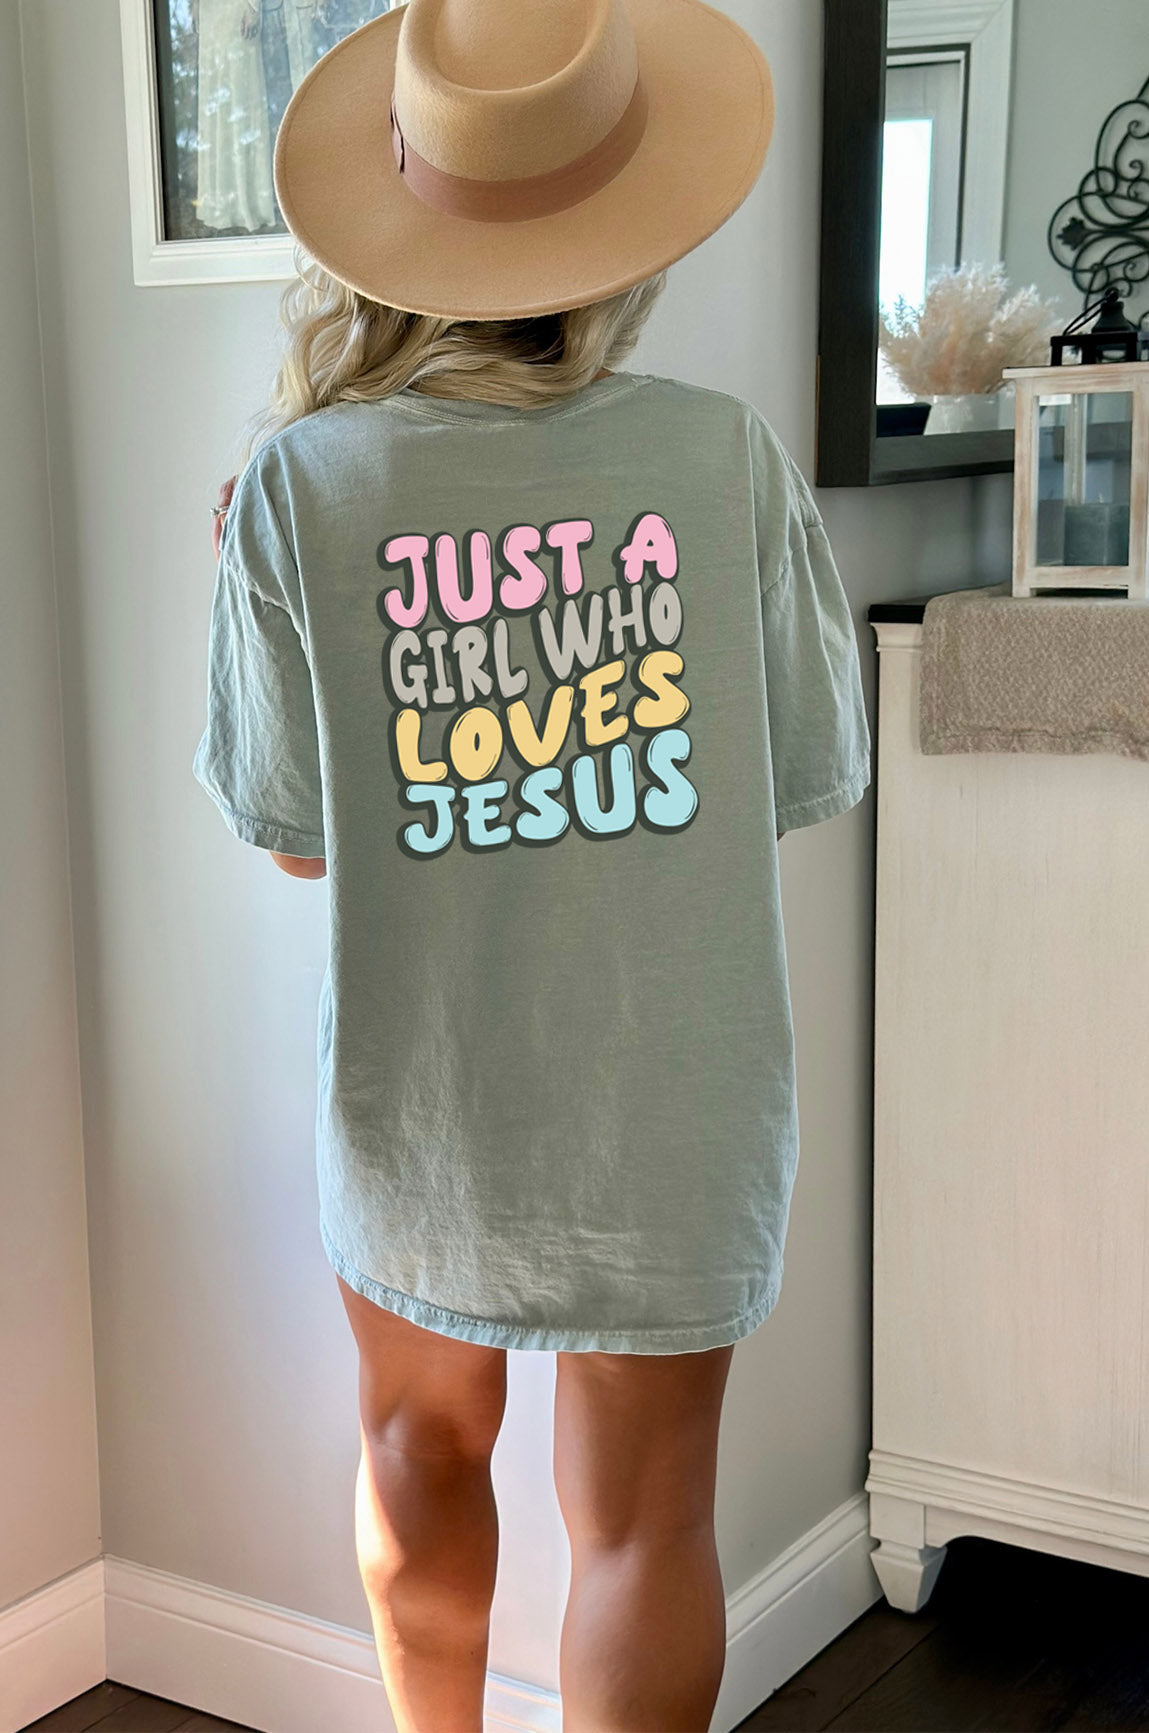 Just a girl who loves Jesus